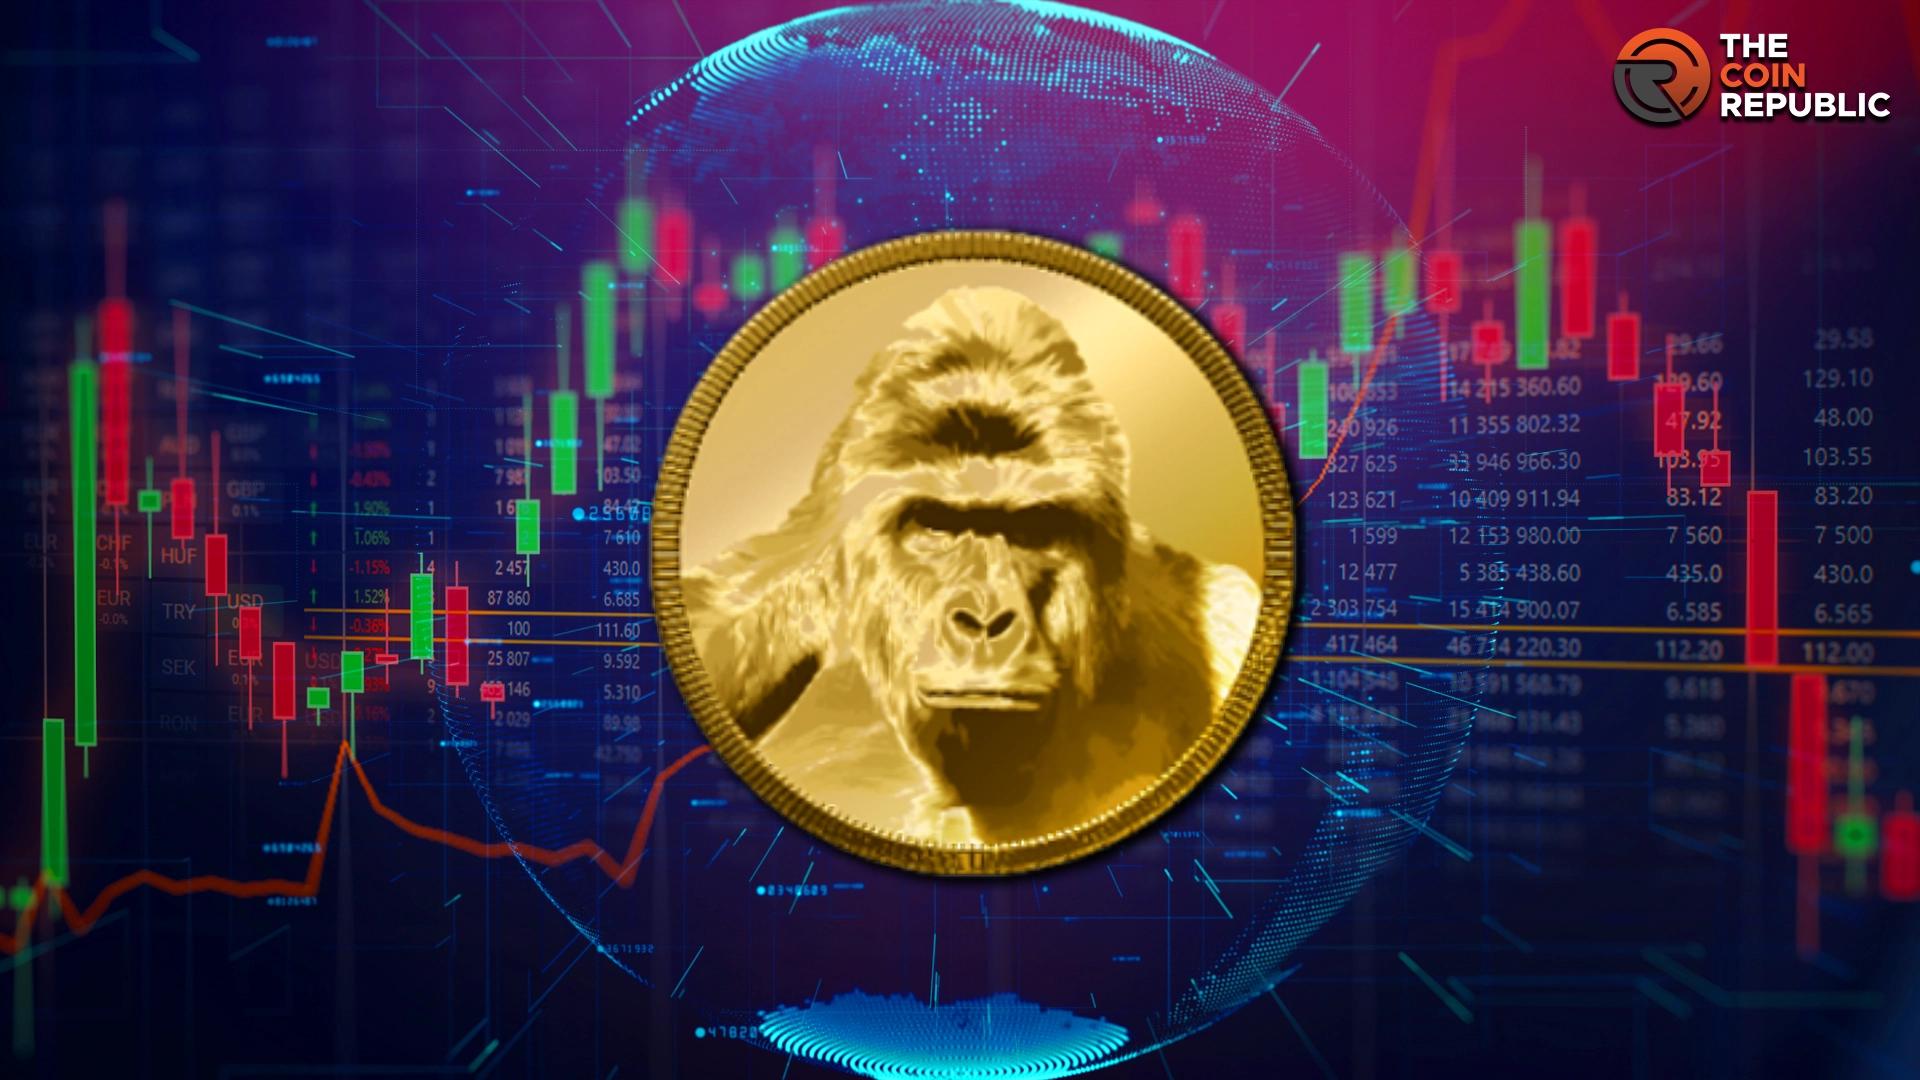 Harambe Coin: A Legacy of Memes Or A Risky Digital Gamble? [Video]